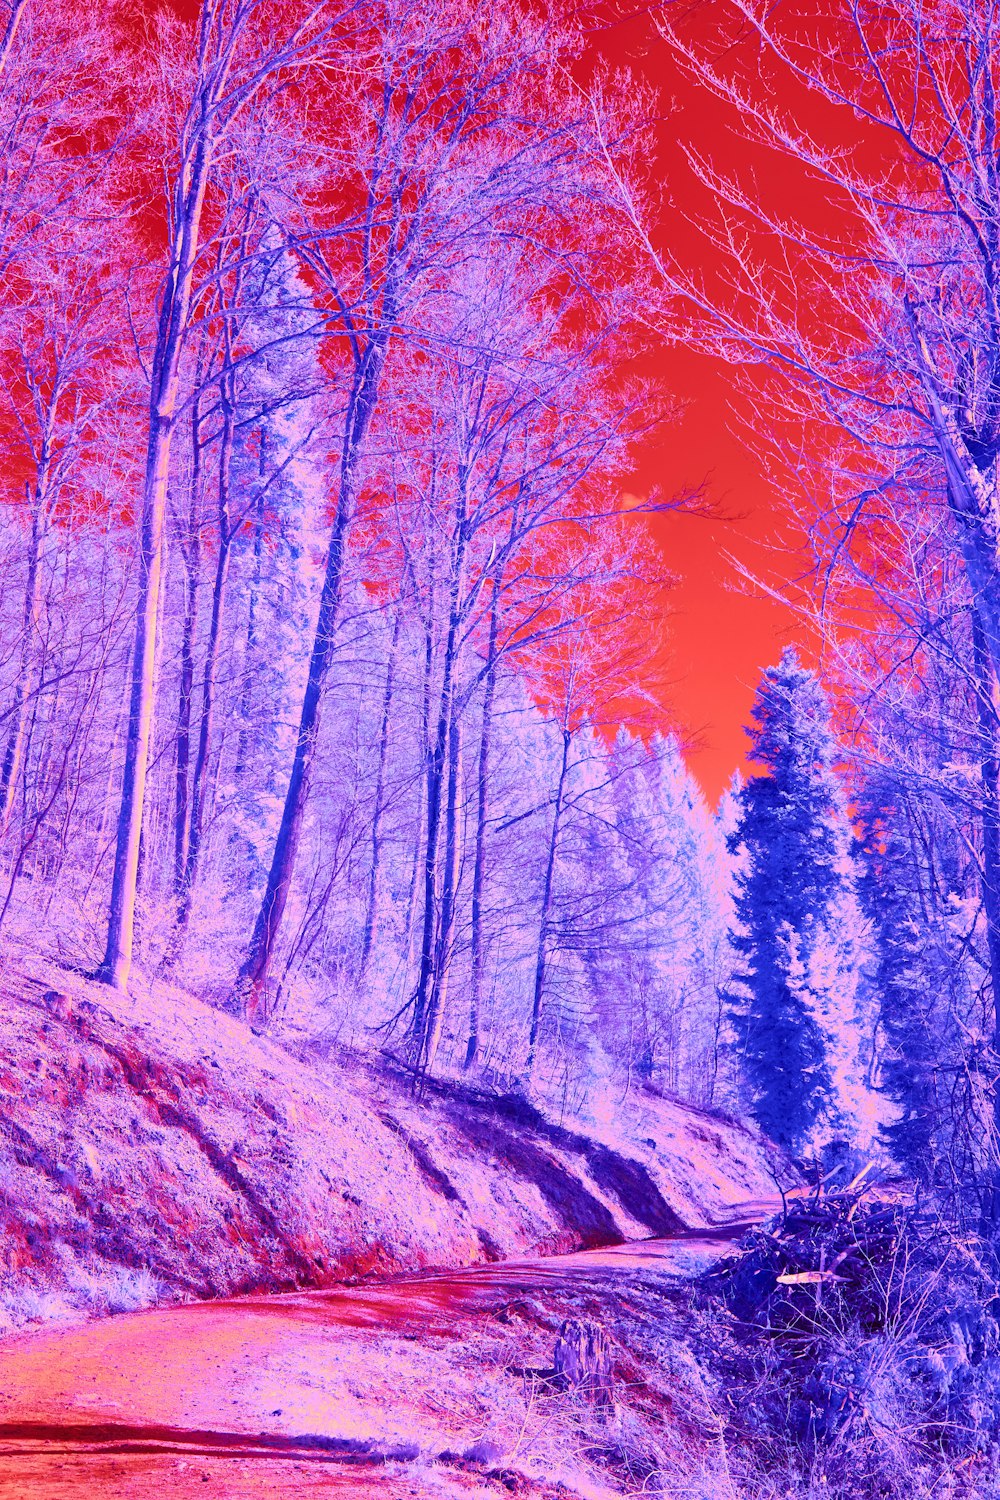 a red and blue infrared image of a path in the woods